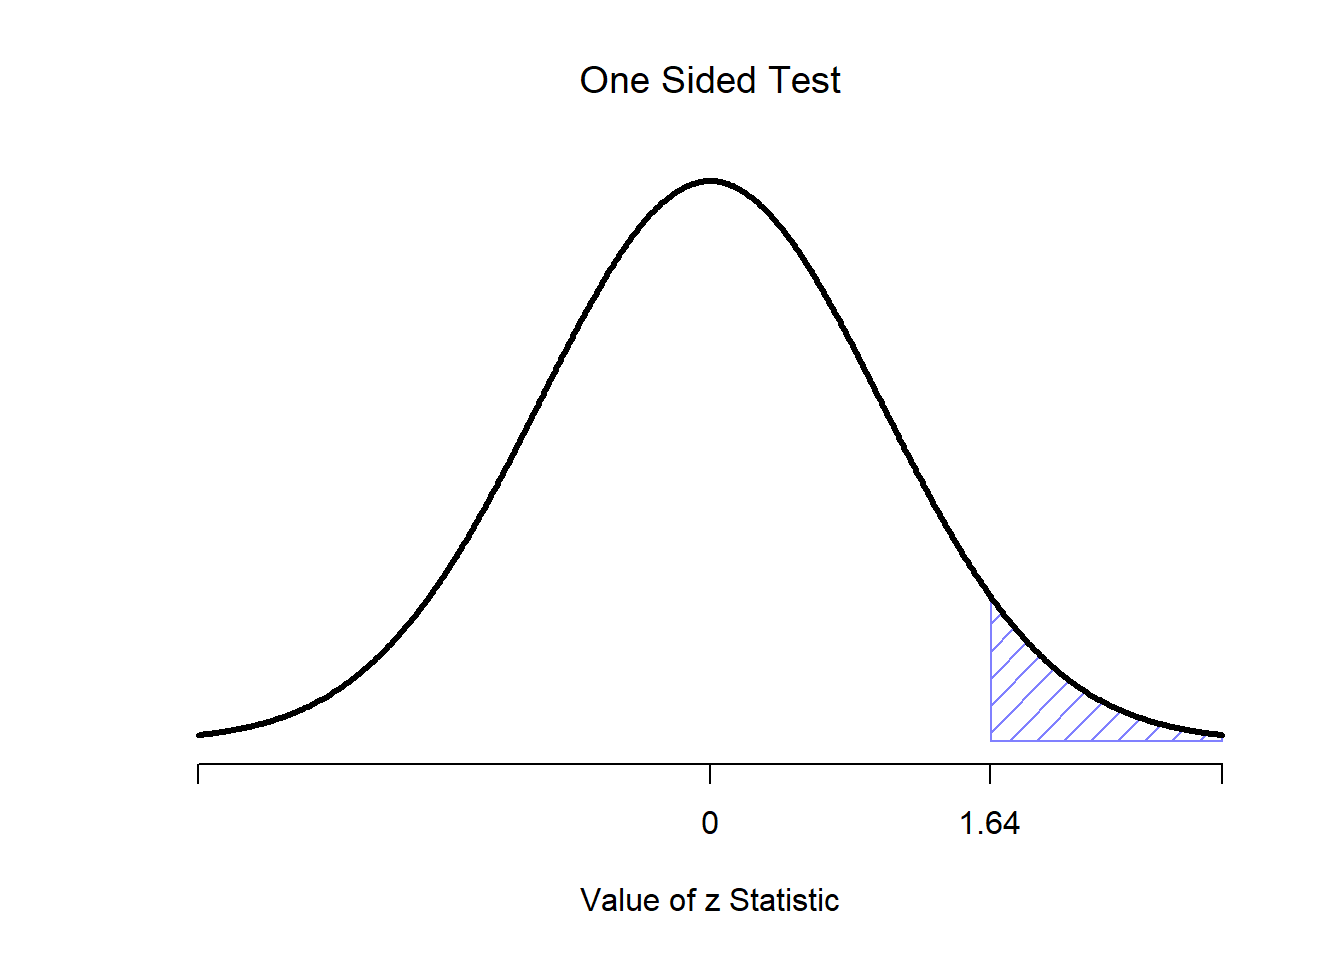 Rejection regions for the one-sided $z$-test